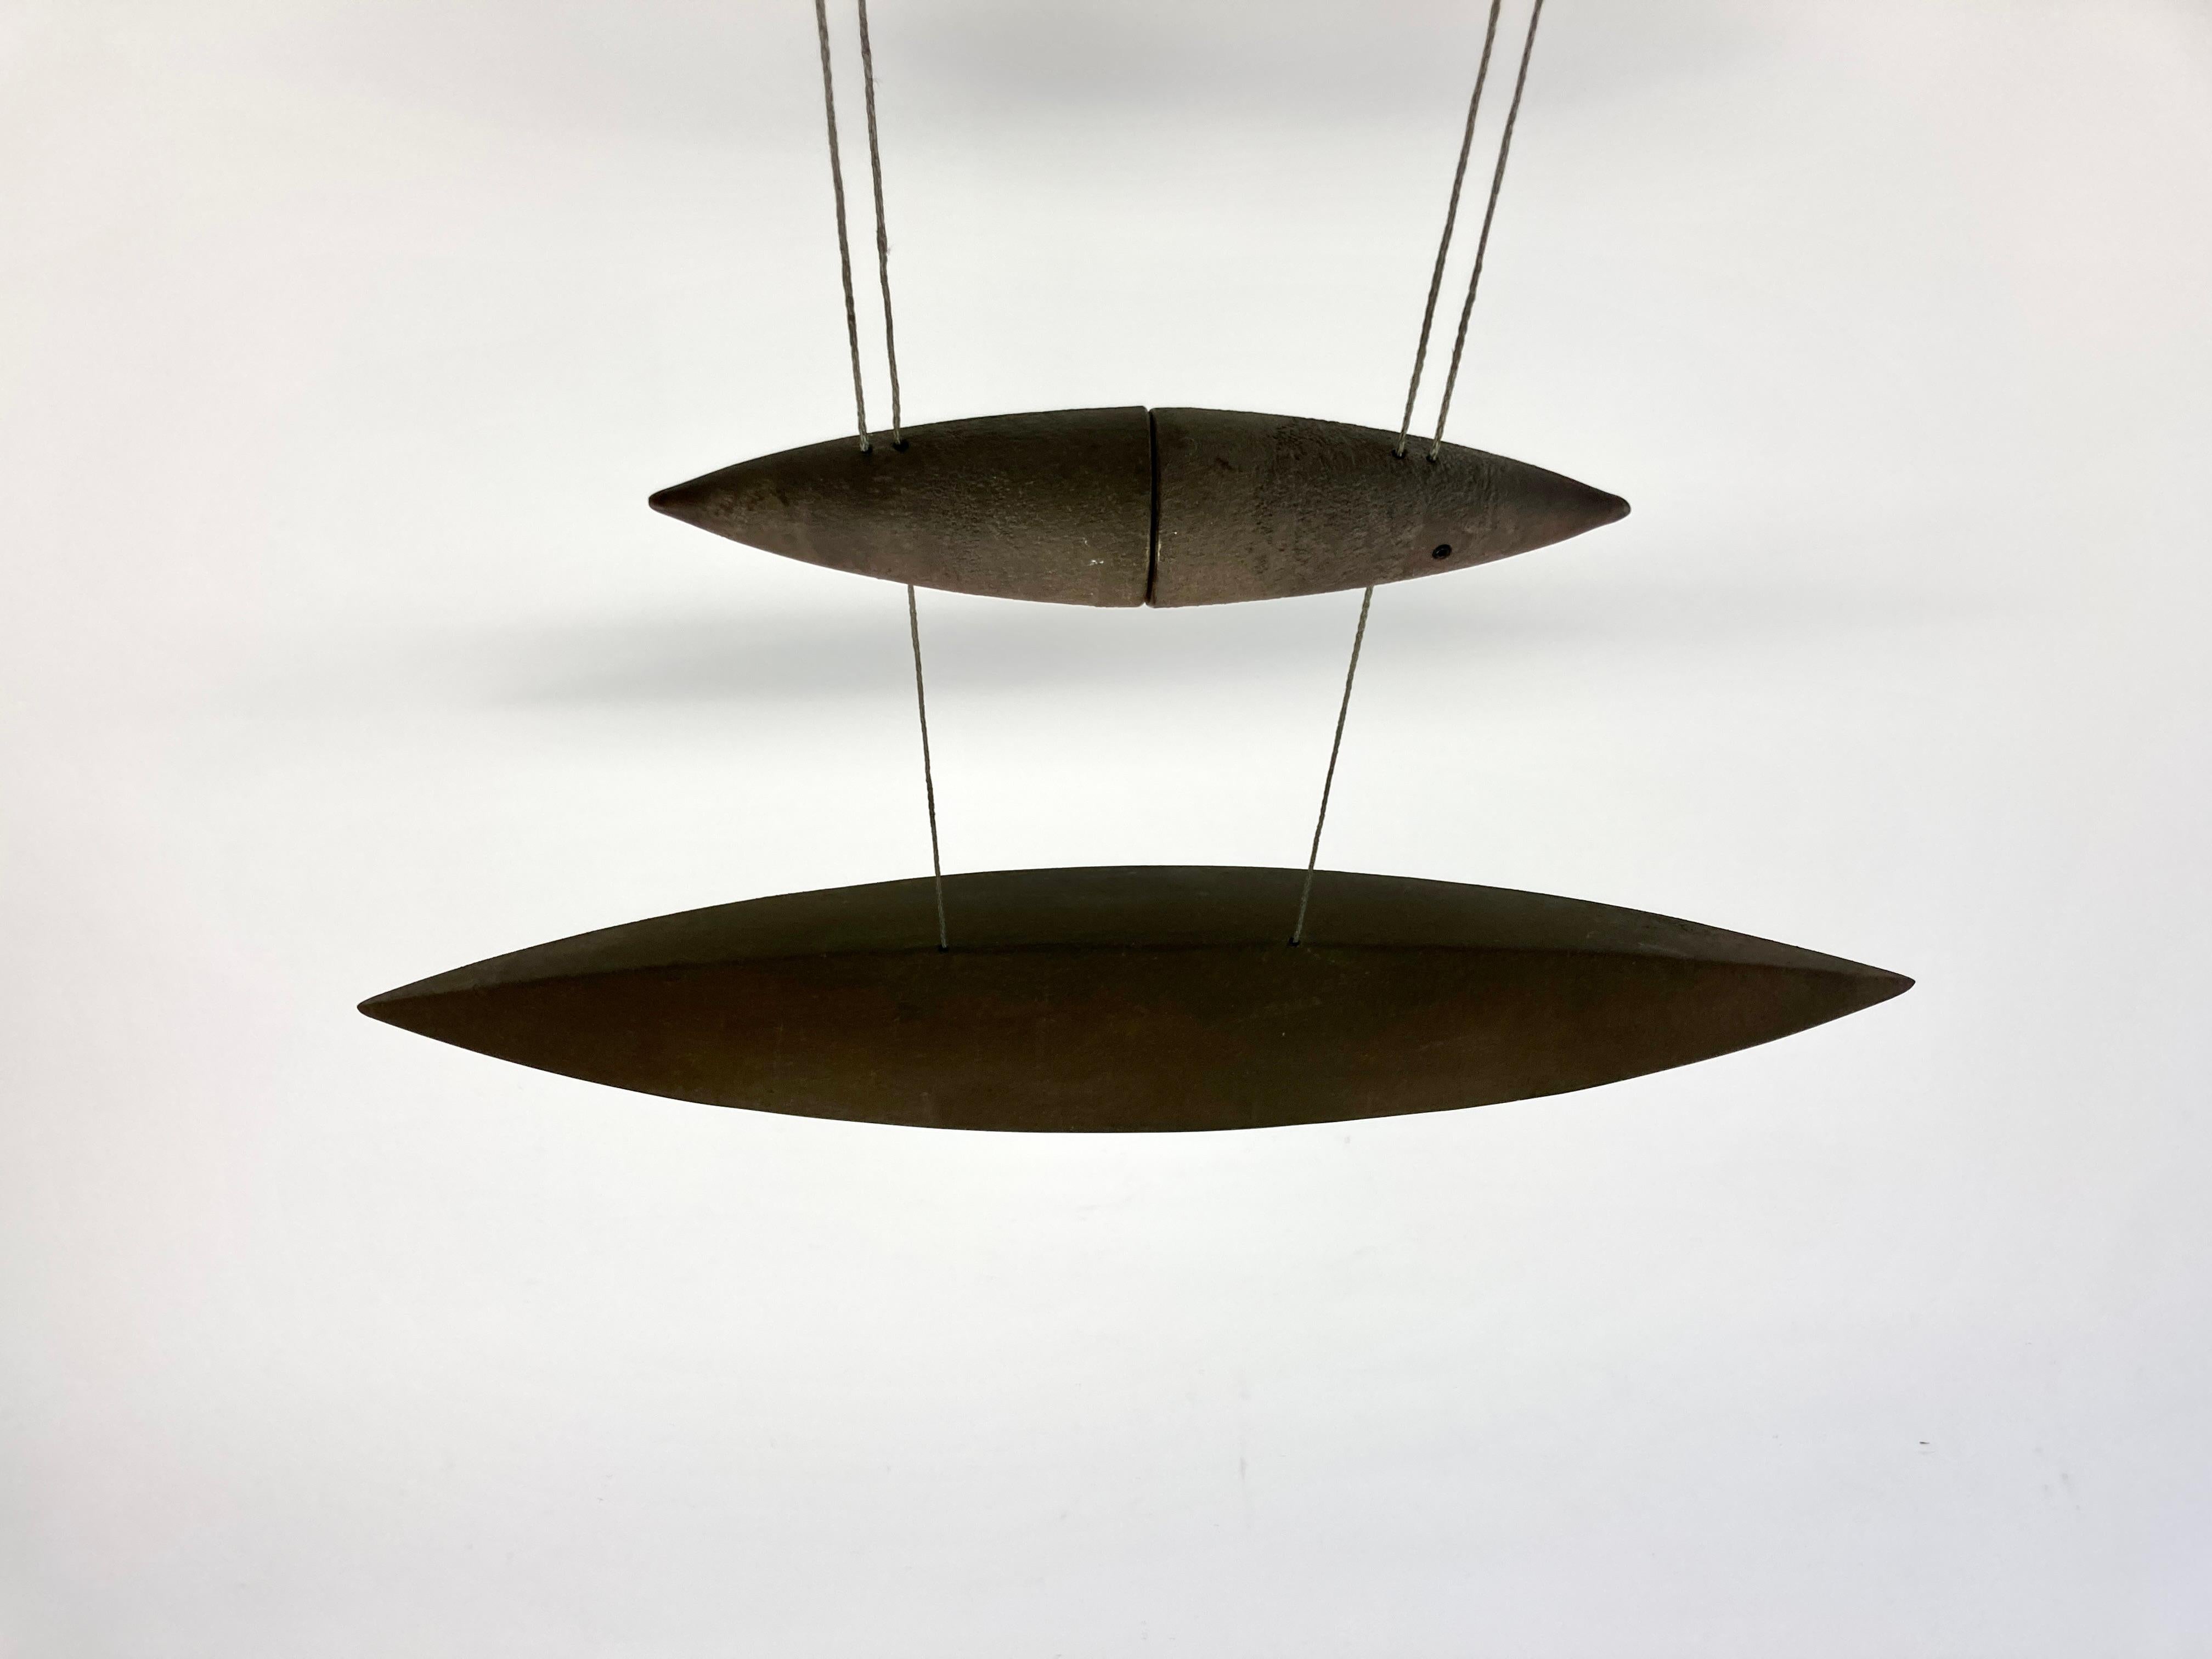 Elegant bronze Tai Lang pendant light designed by Tobias Grau, Germany.

High grade raw bronze top contrasted with polished bronze around the edges of the light source. Soft light is dispersed downwards through opal glass.

The shade is balanced by